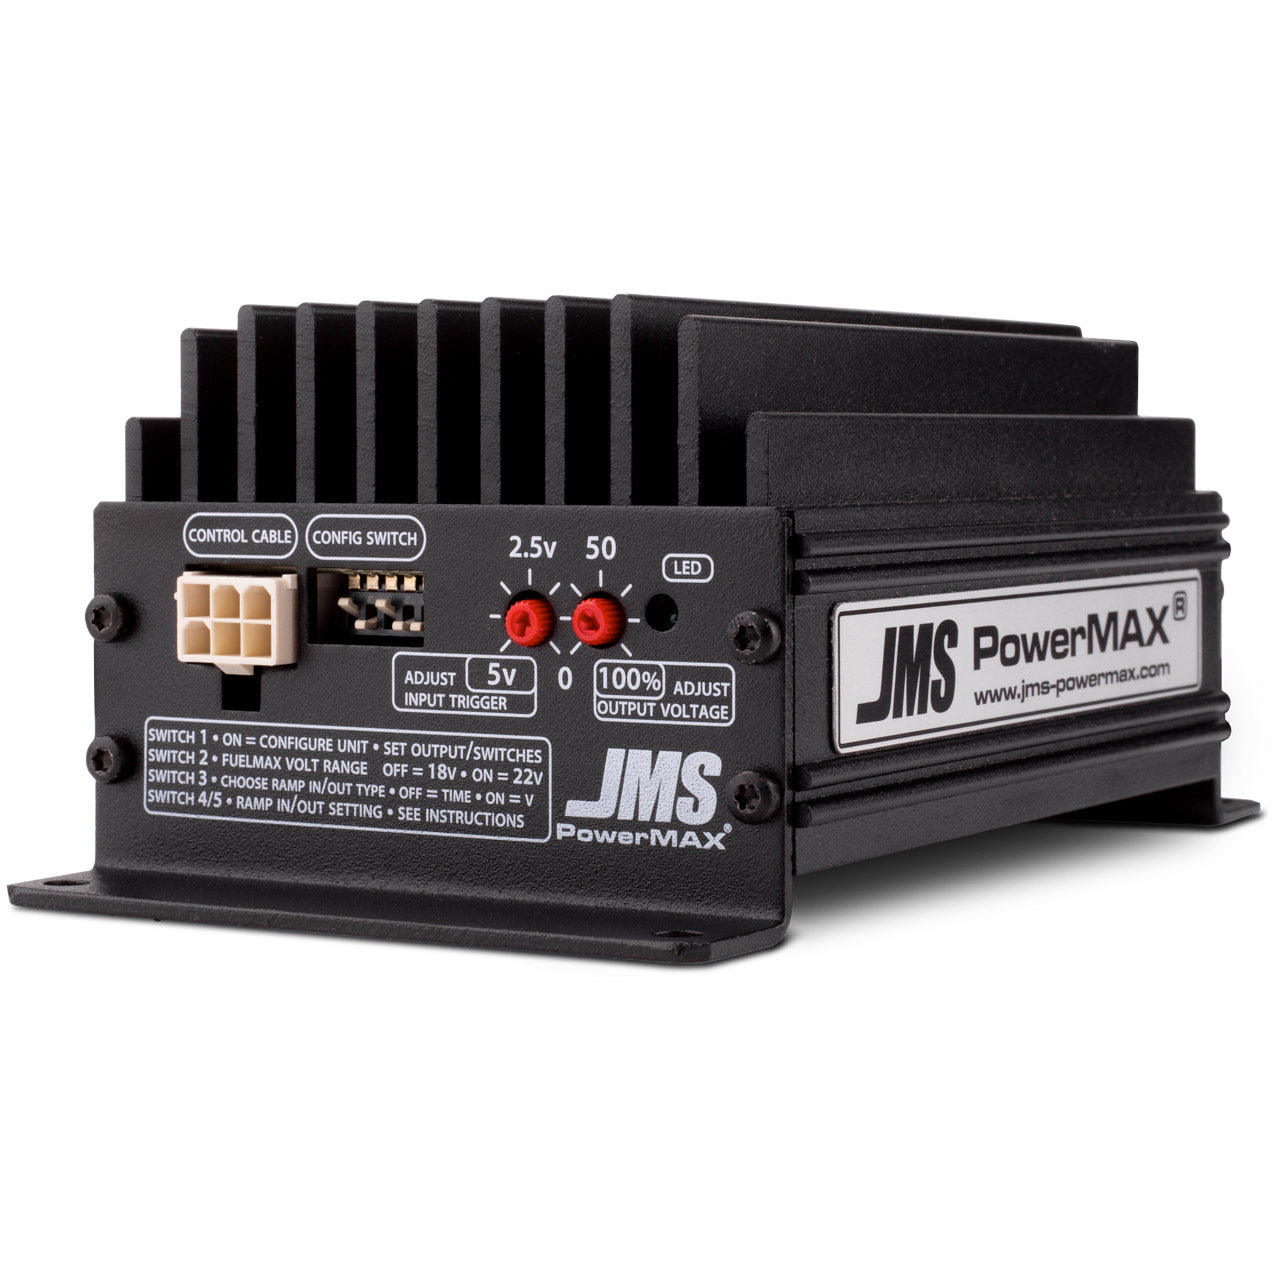 JMS FuelMAX - Fuel Pump Voltage Booster V2 - Universal Single Output (Activation - MAF/MAP/TPS or Ground includes Ext pressure switch) P2000